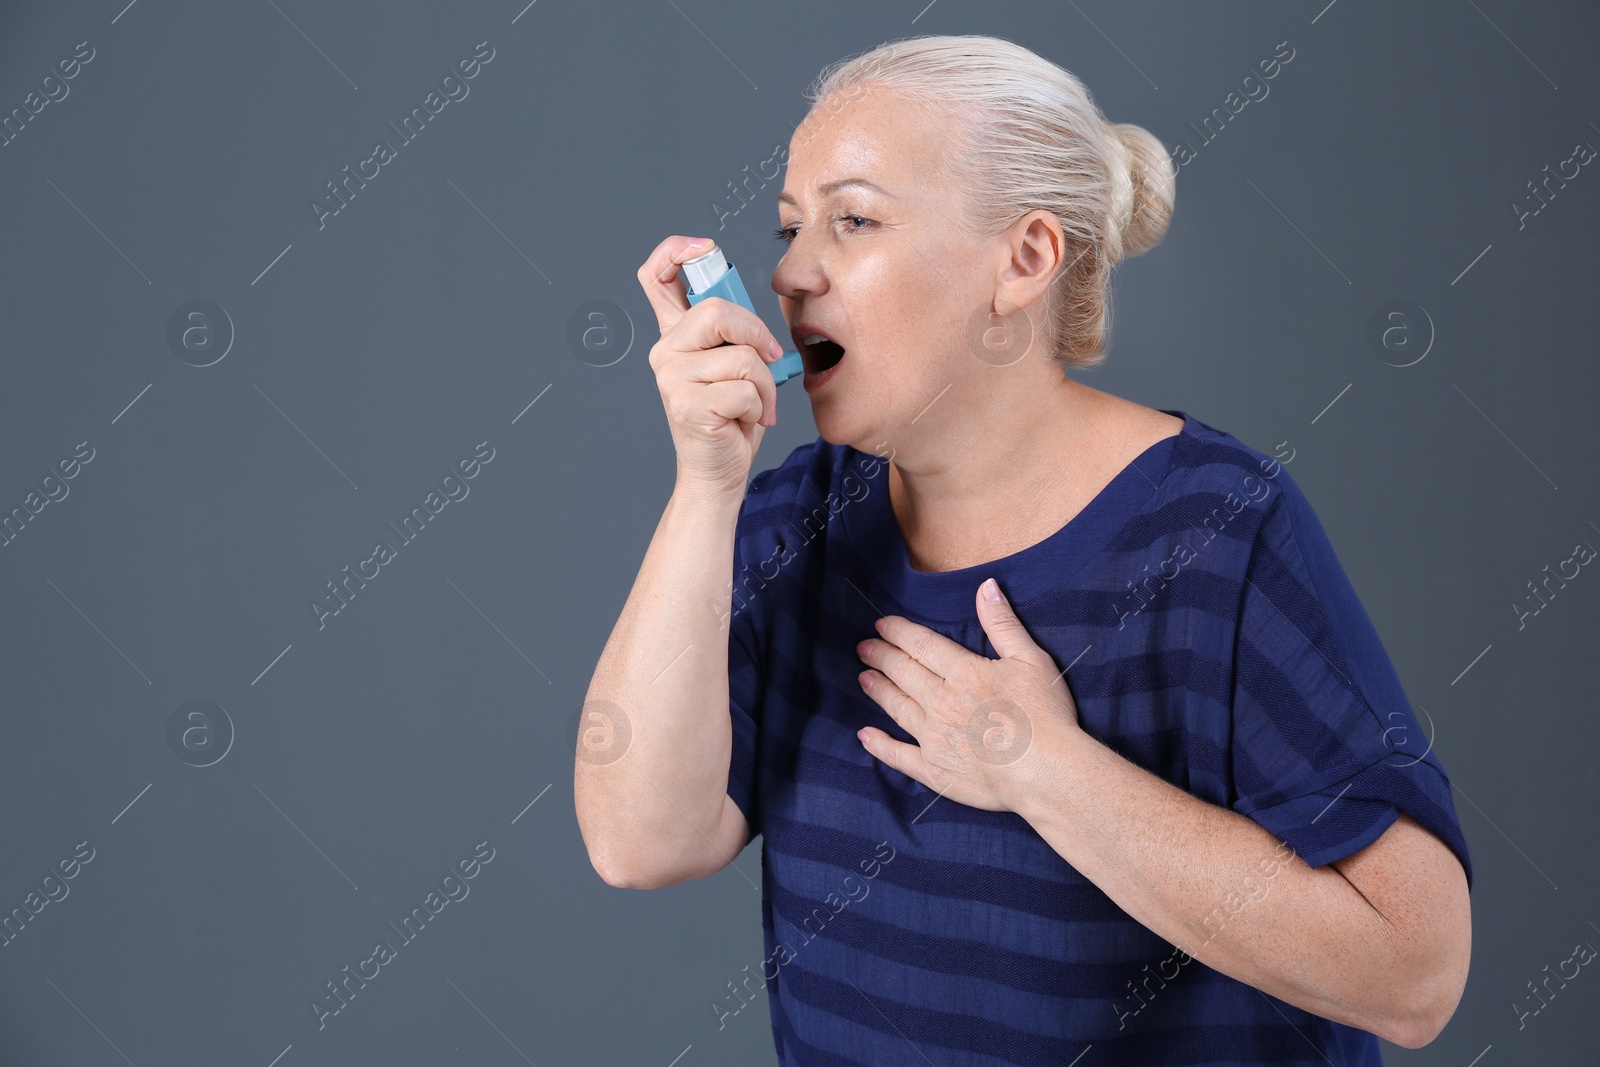 Photo of Woman using asthma inhaler on color background with space for text